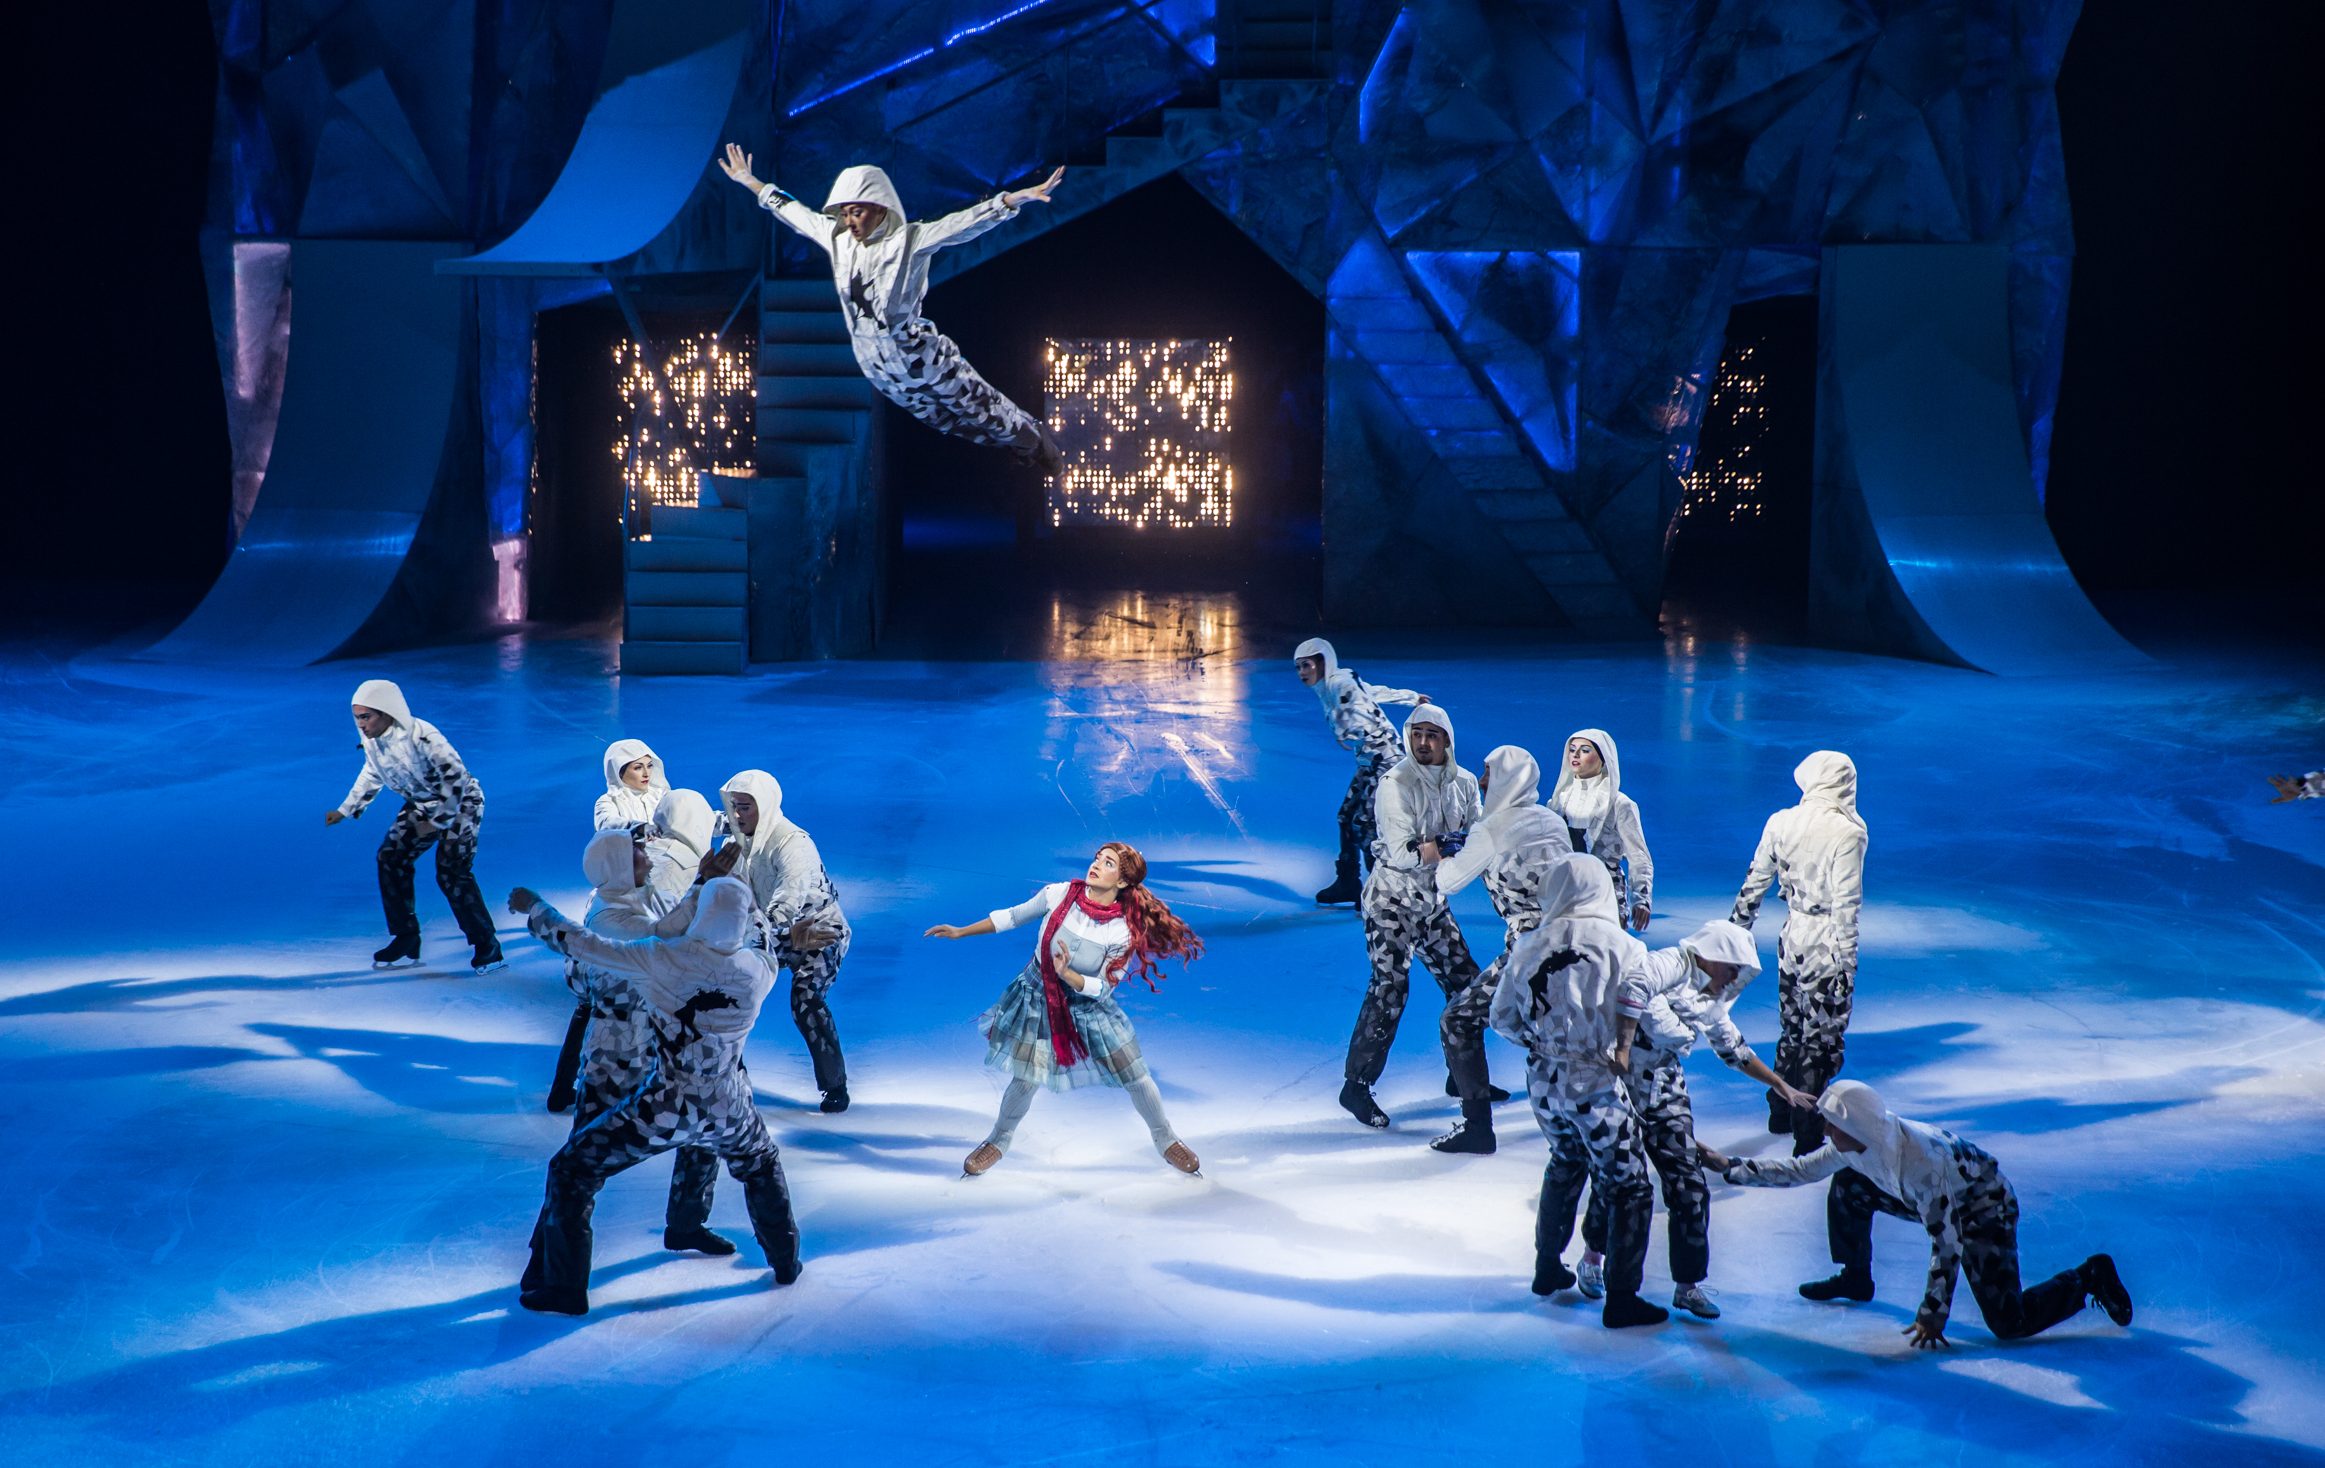 Ice-borne and airborne, Cirque du Soleil’s 'Crystal' aims high.